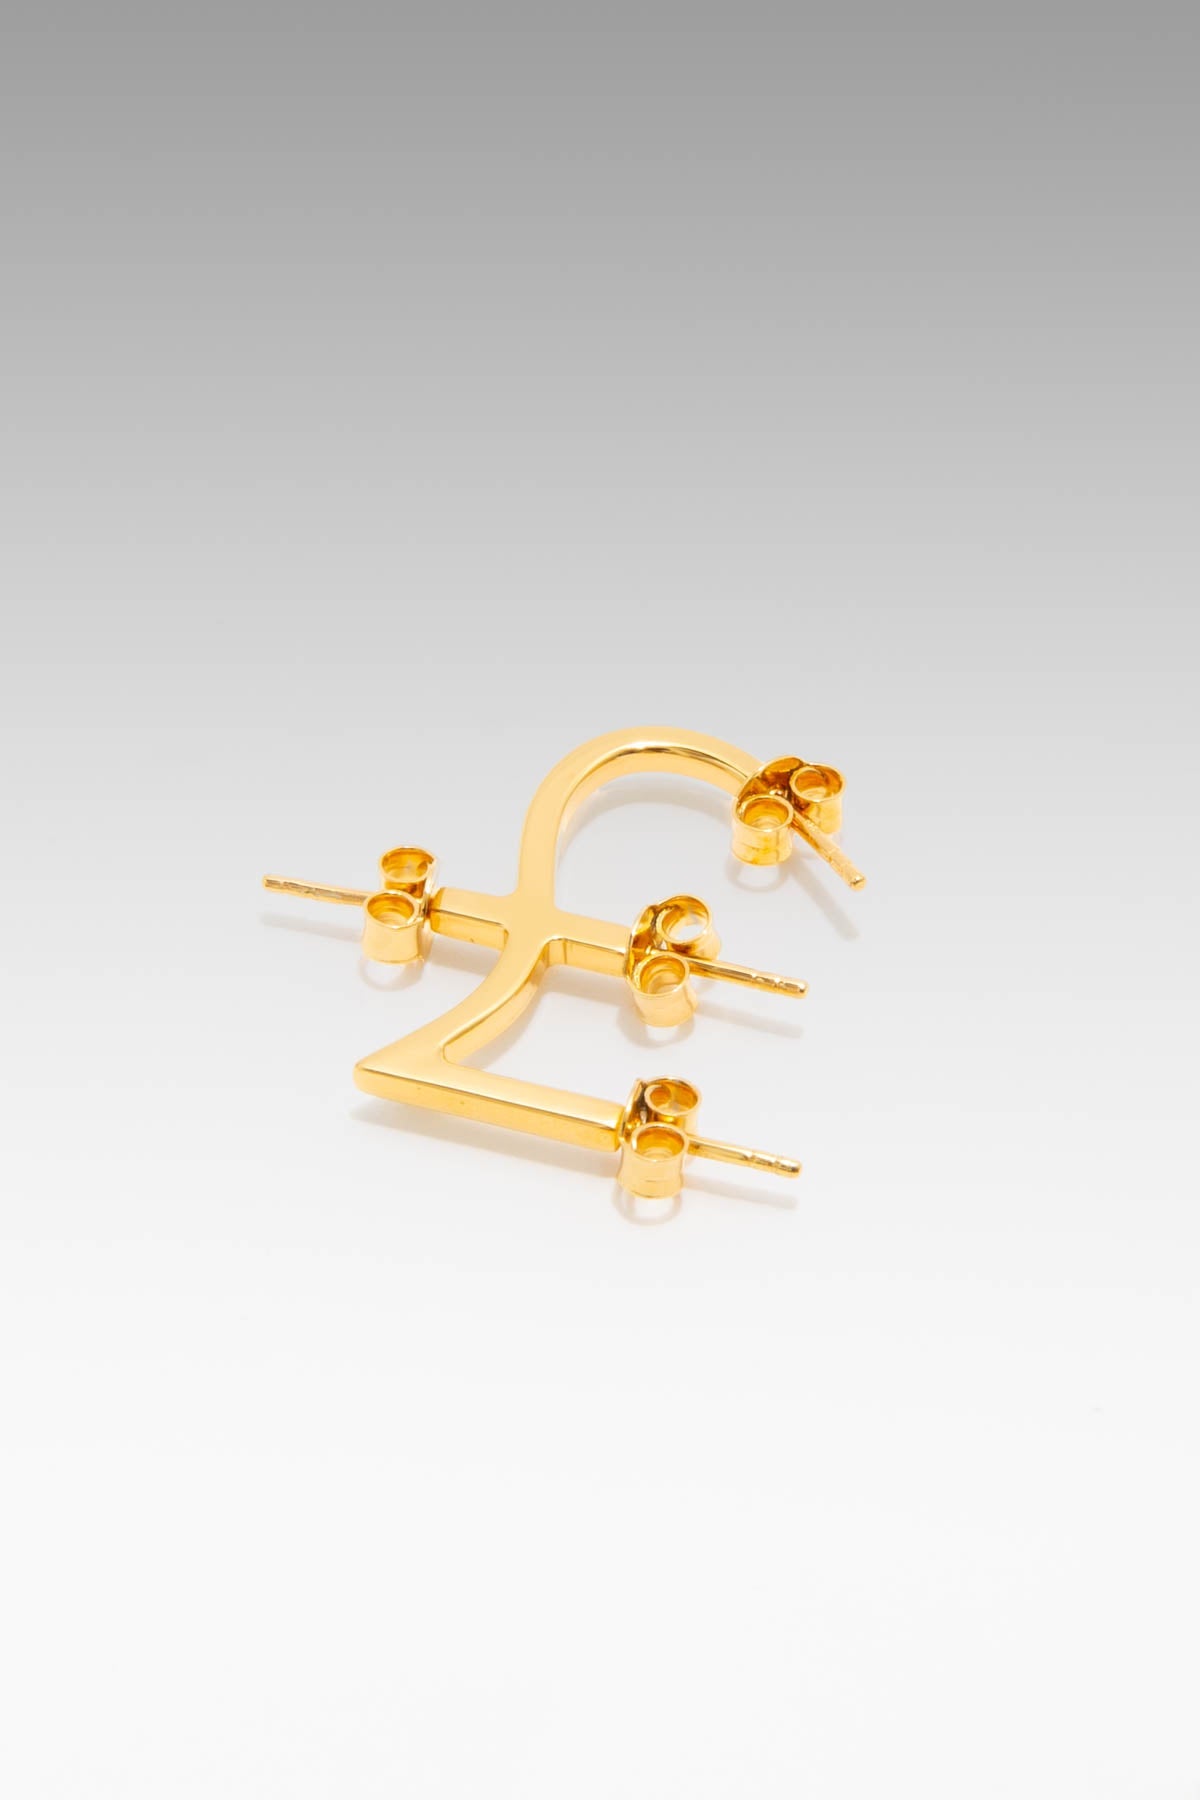 B213_Currency Earring Pound_L_01